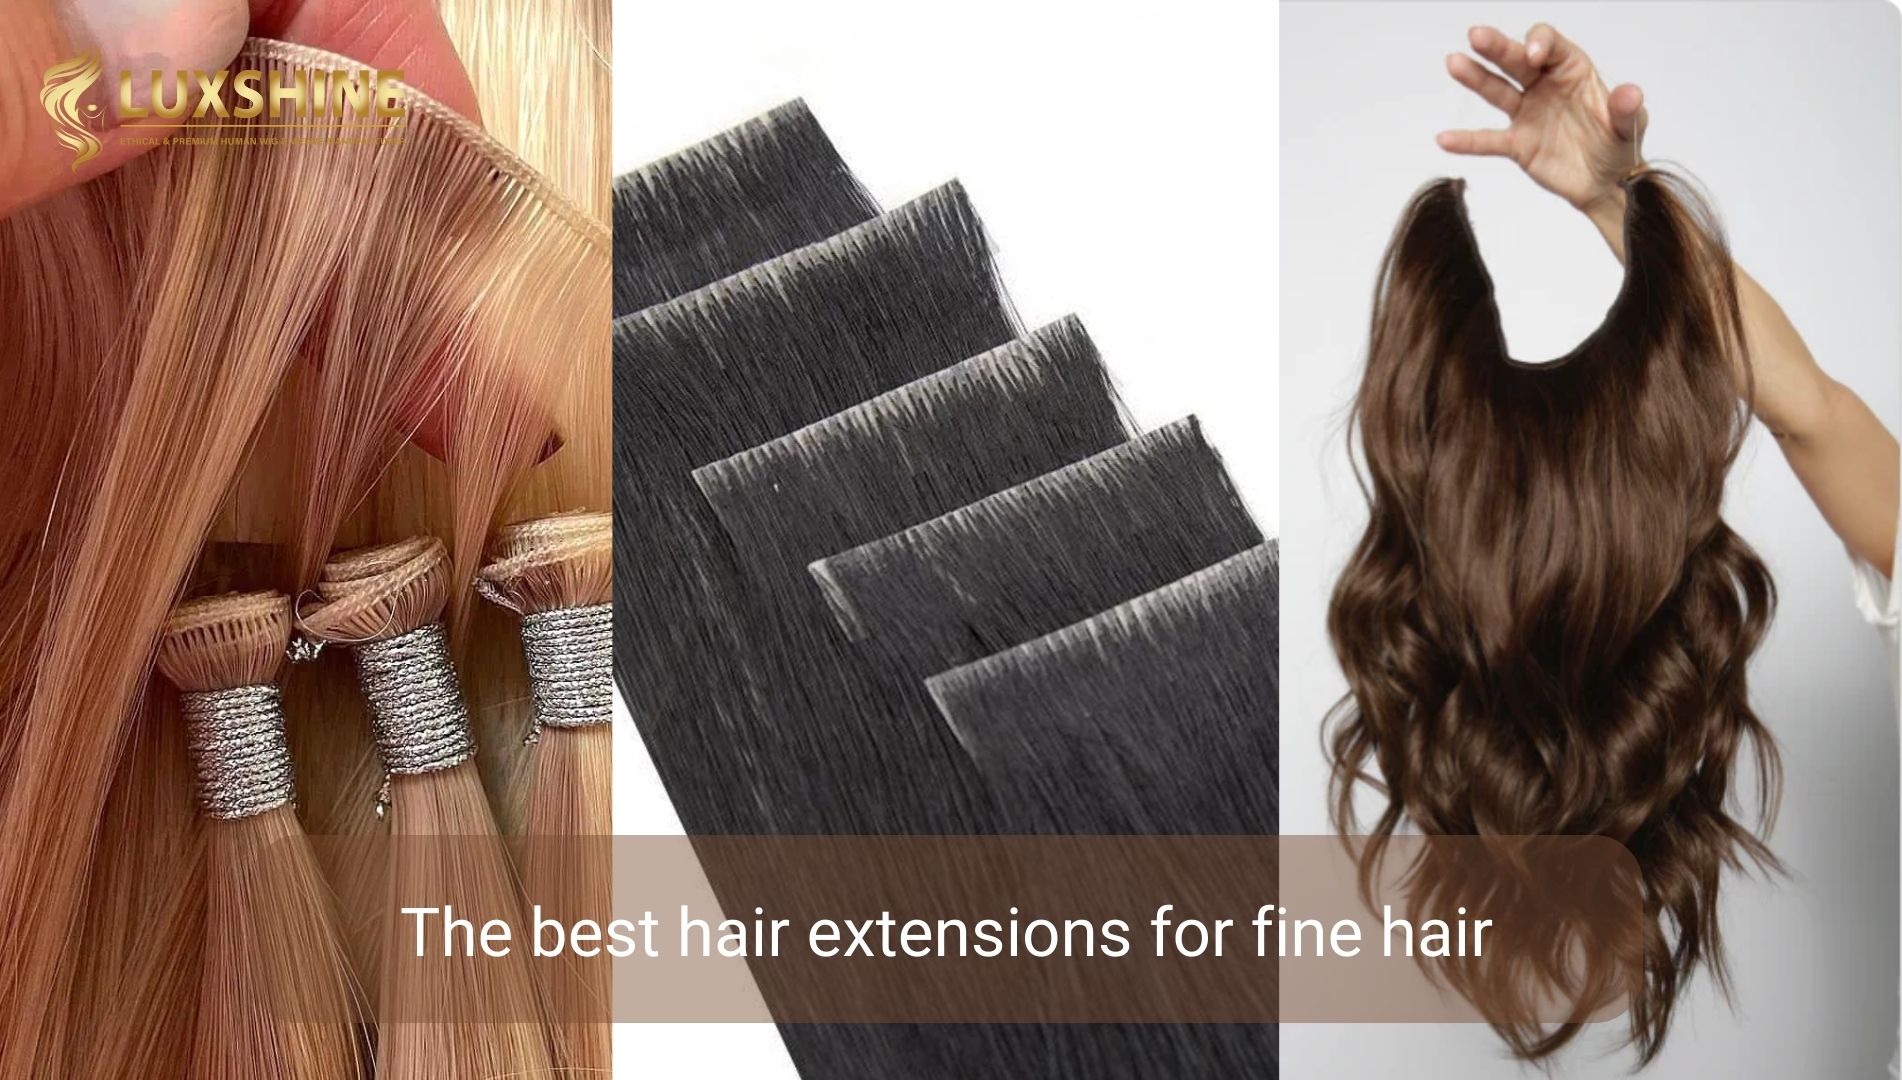 Top 3 best hair extensions for fine hair